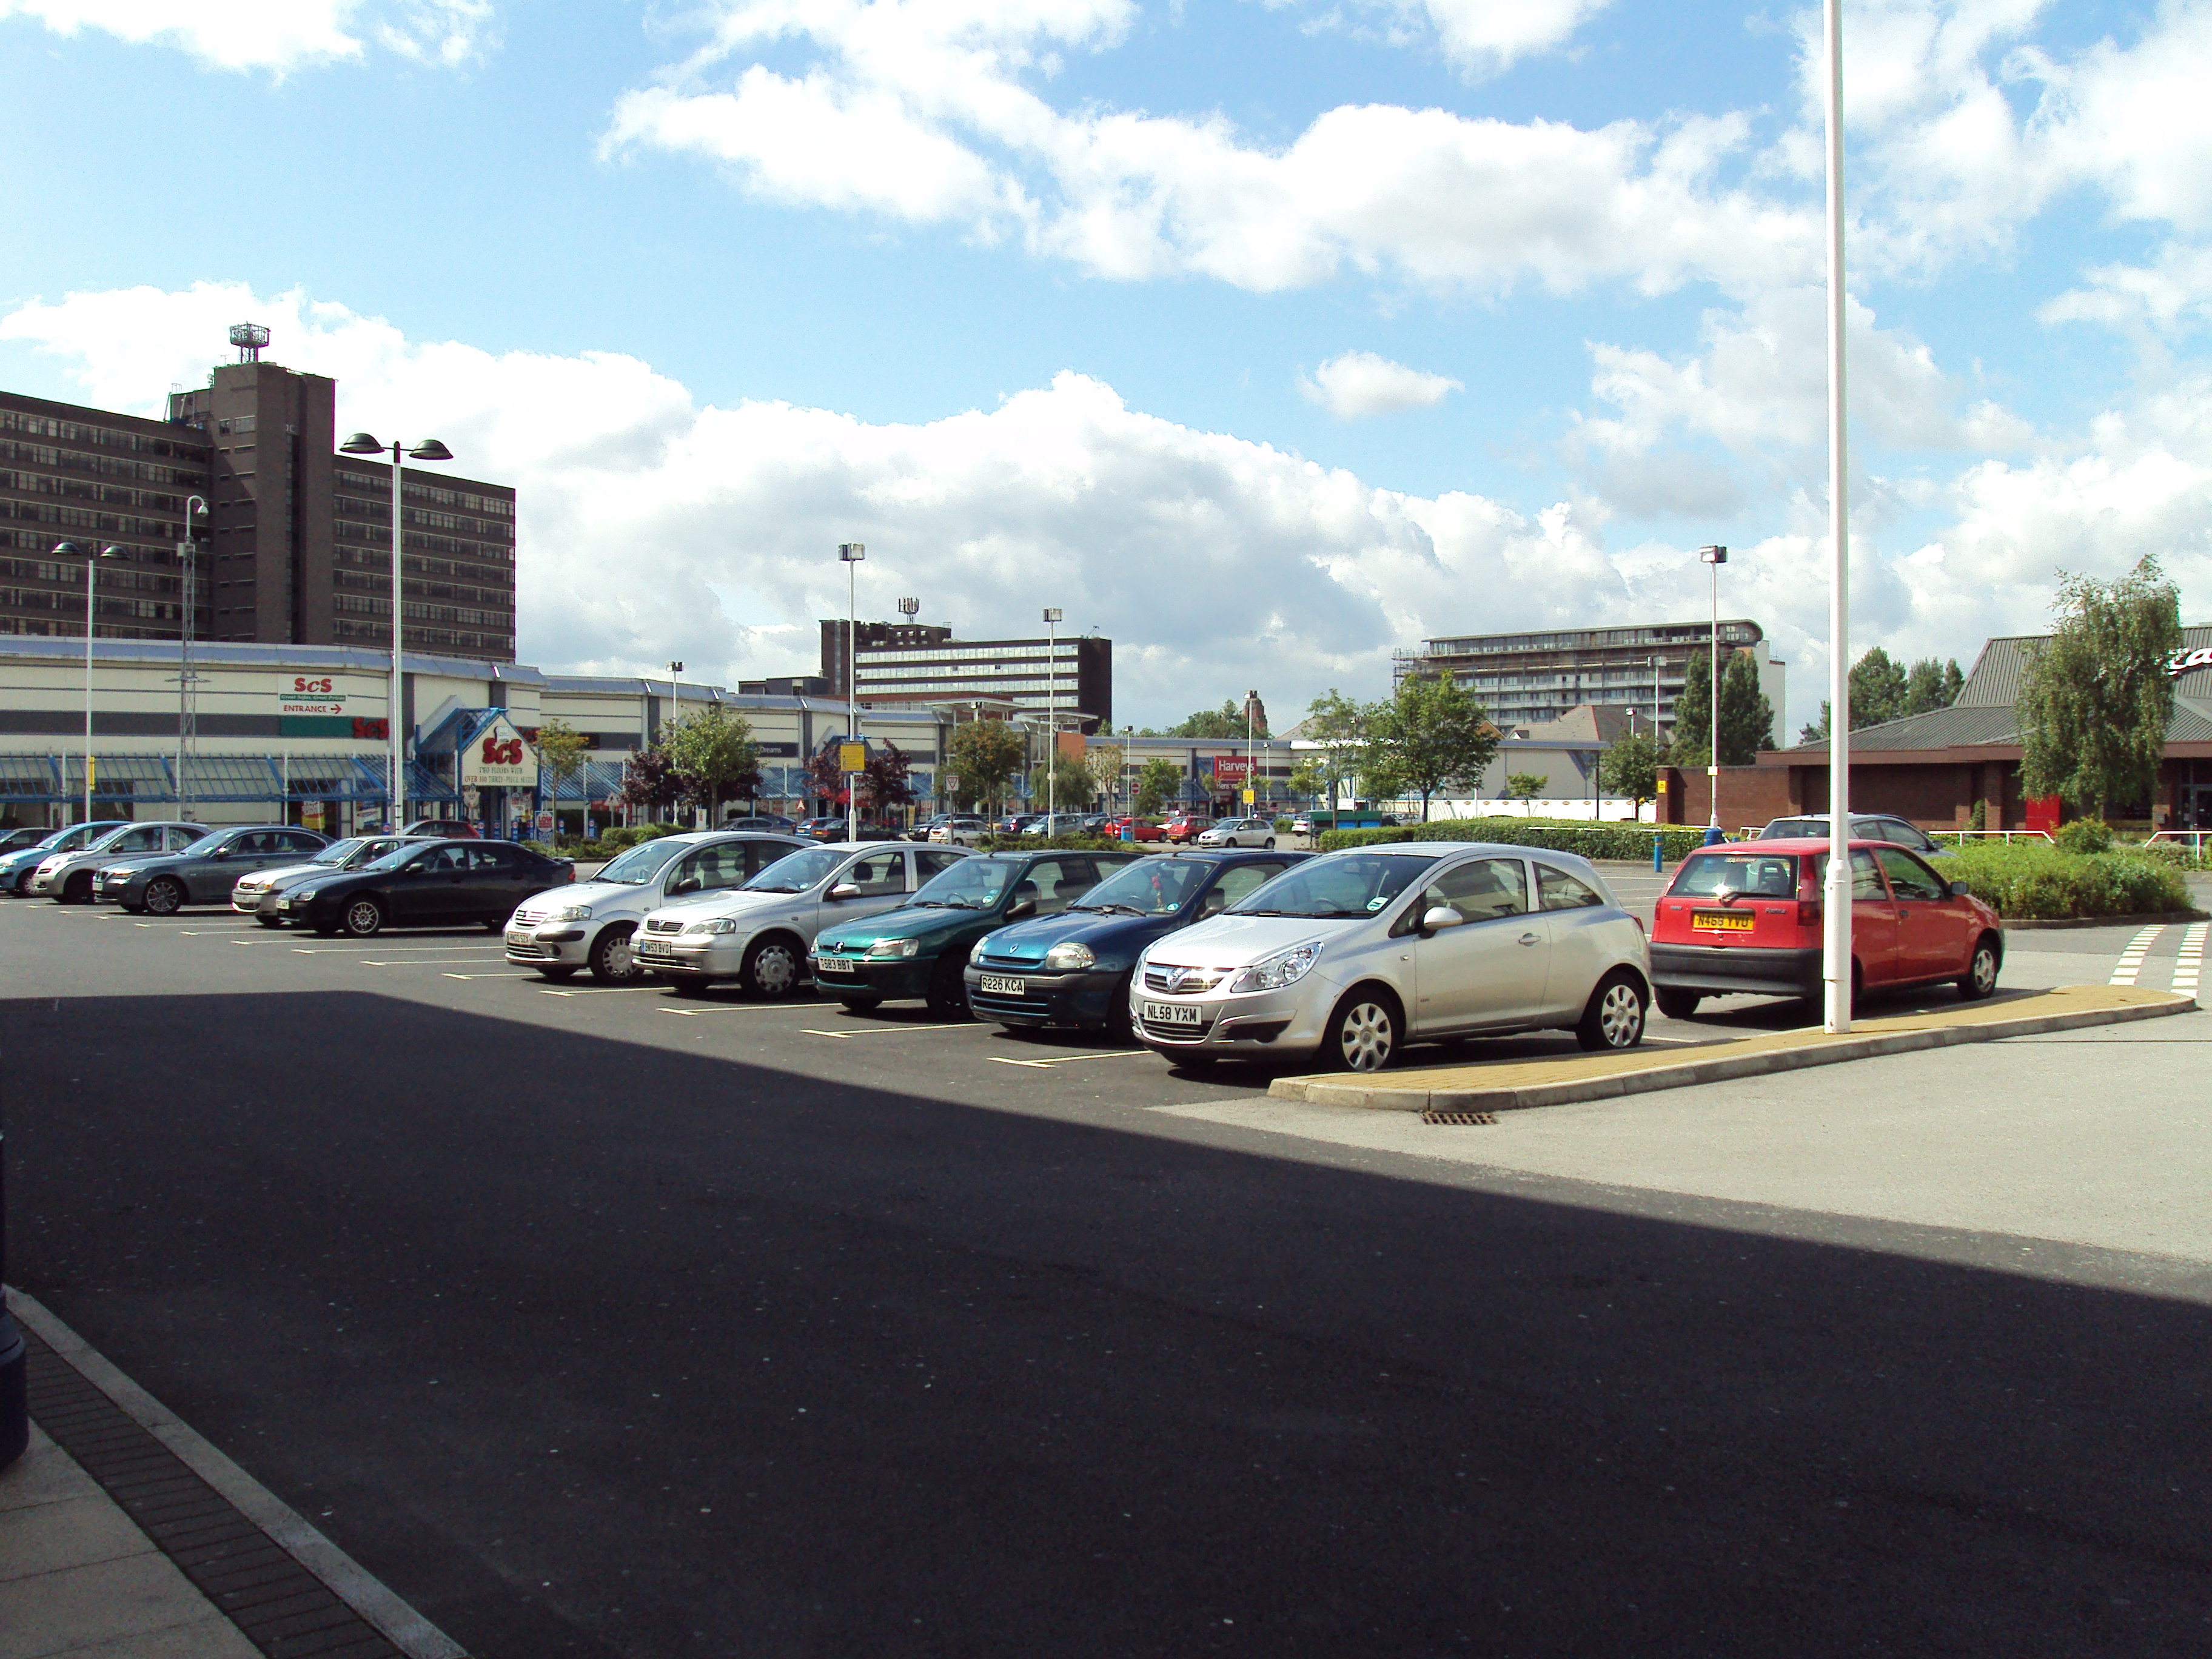 1 Image of Droylsden in Greater Manchester